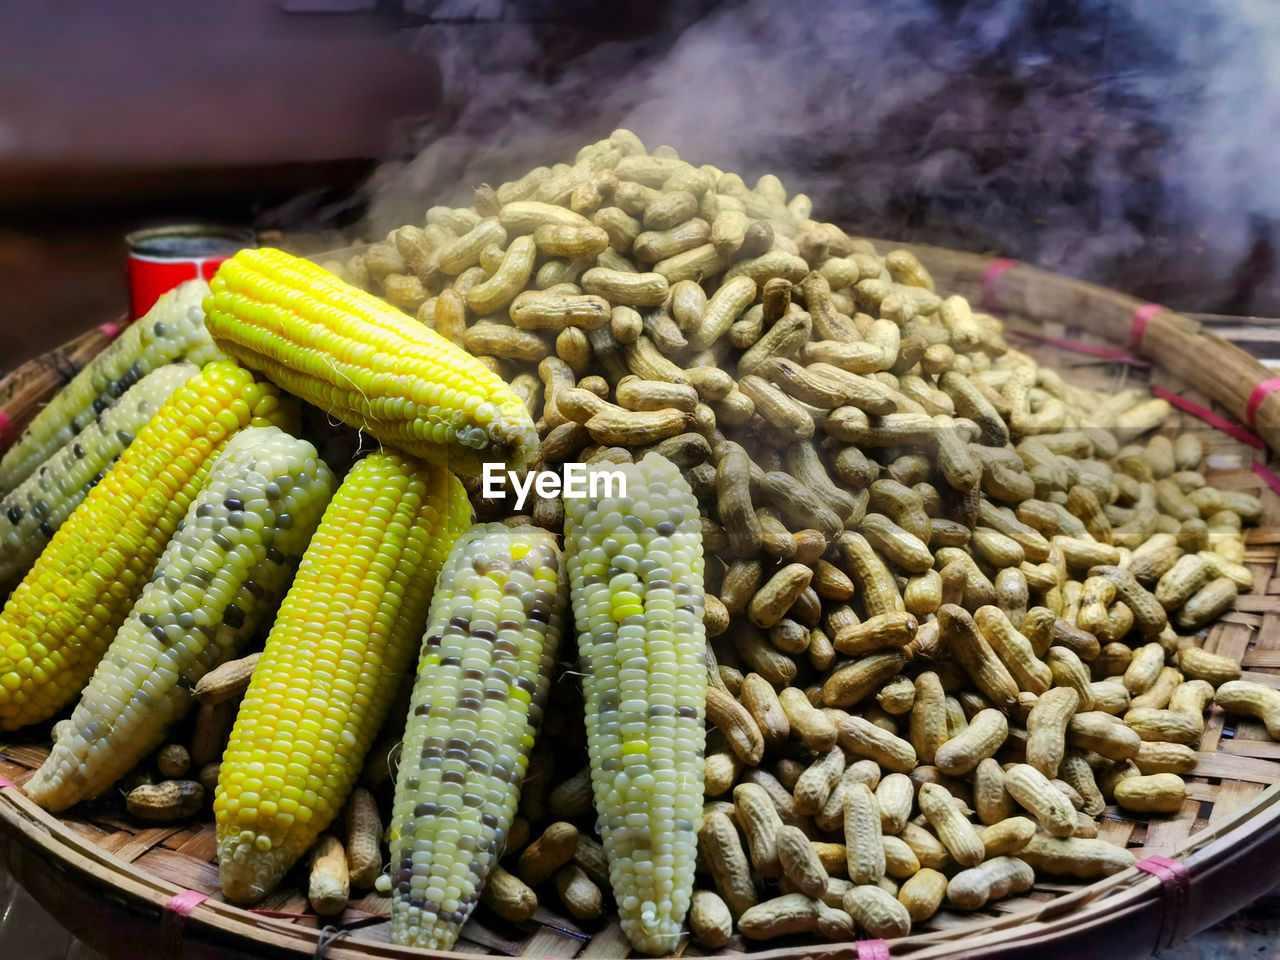 Steaming hot peanuts and corn on a market stall in yangon, myanmar.